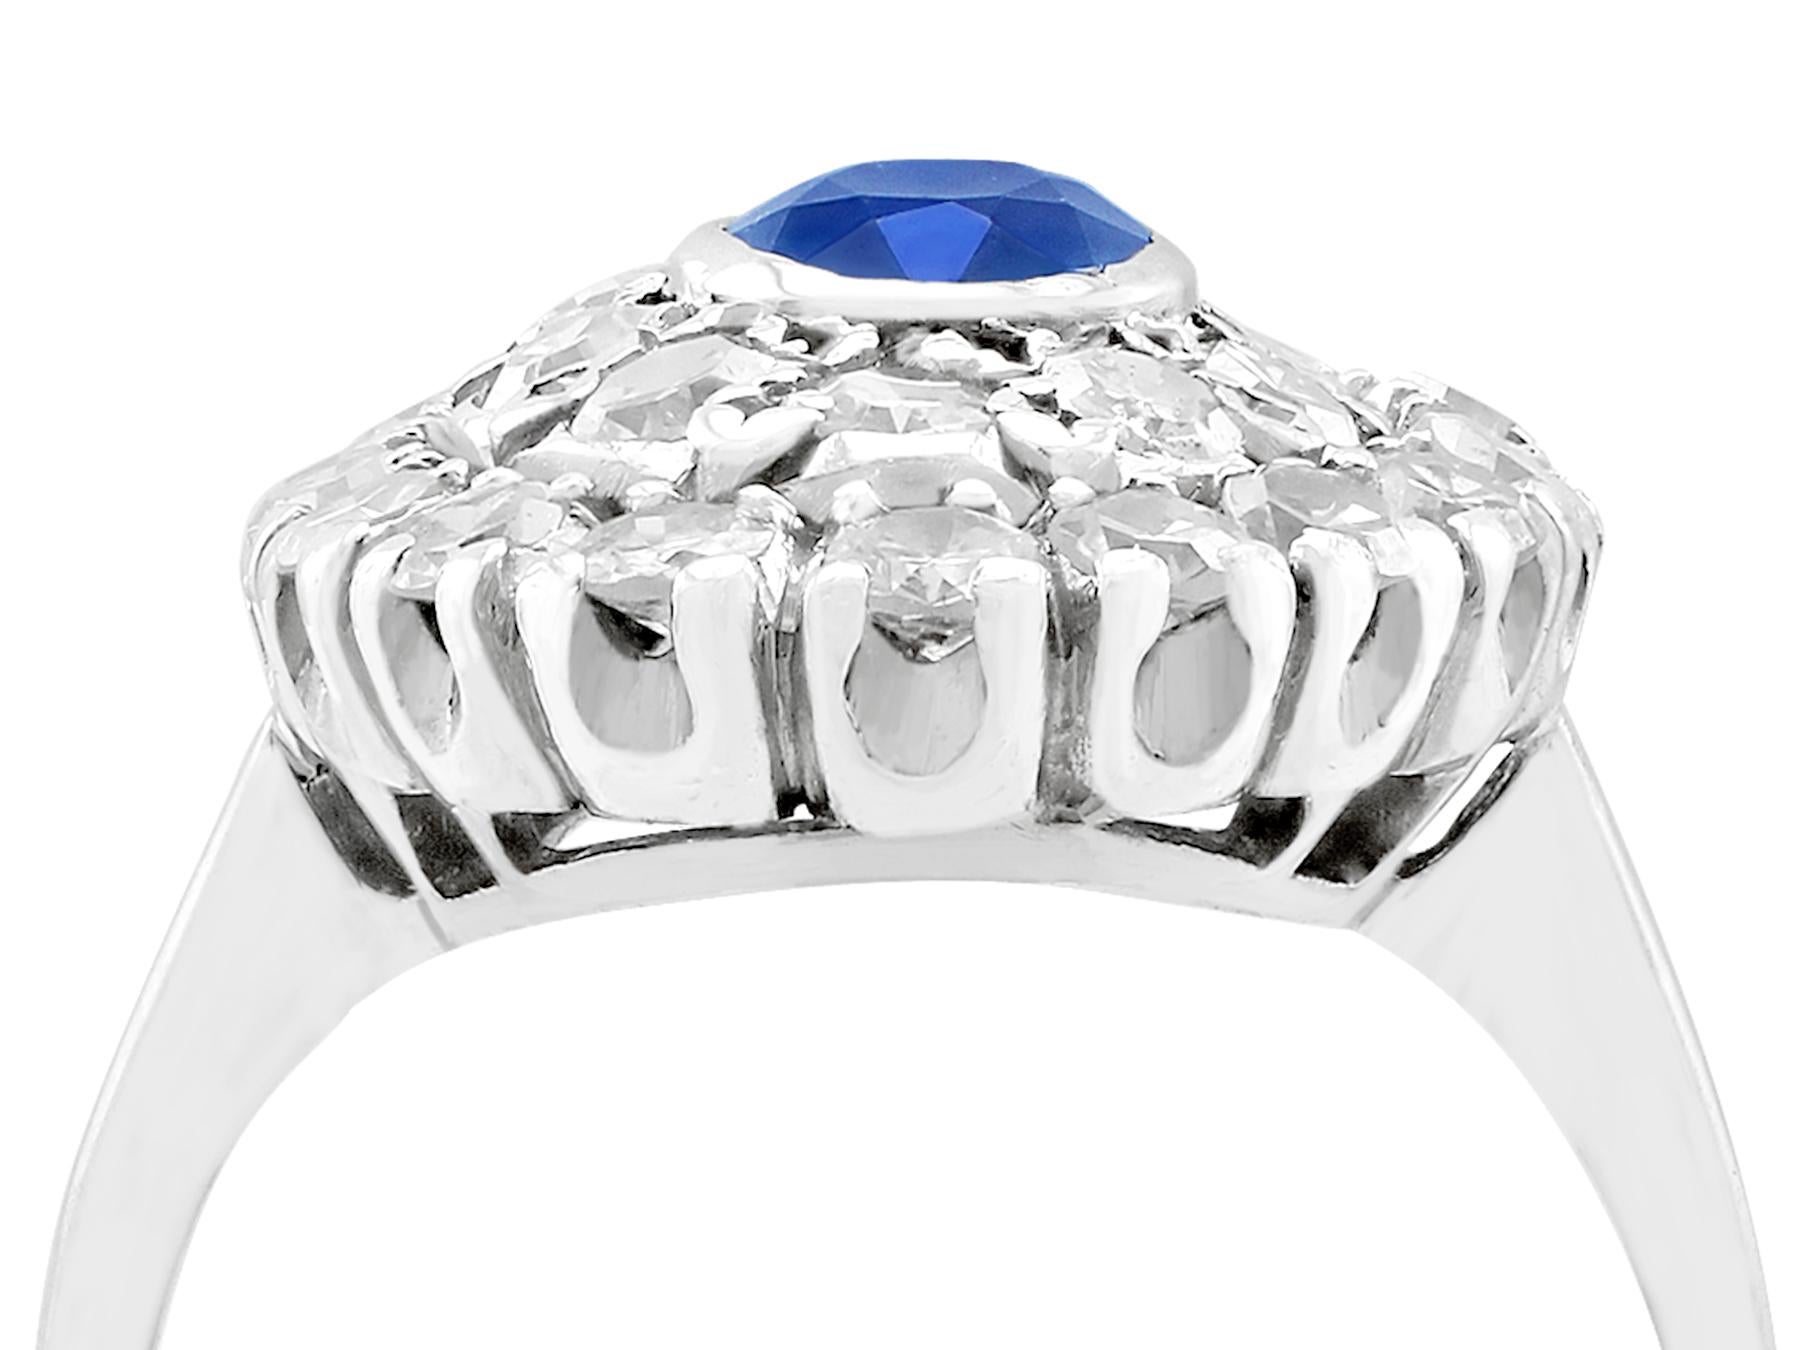 An impressive vintage 0.80 carat sapphire and 1.88 carat diamond, platinum cluster style dress ring; part of our diverse vintage jewelry and estate jewelry collections.

This fine and impressive vintage sapphire ring has been crafted in